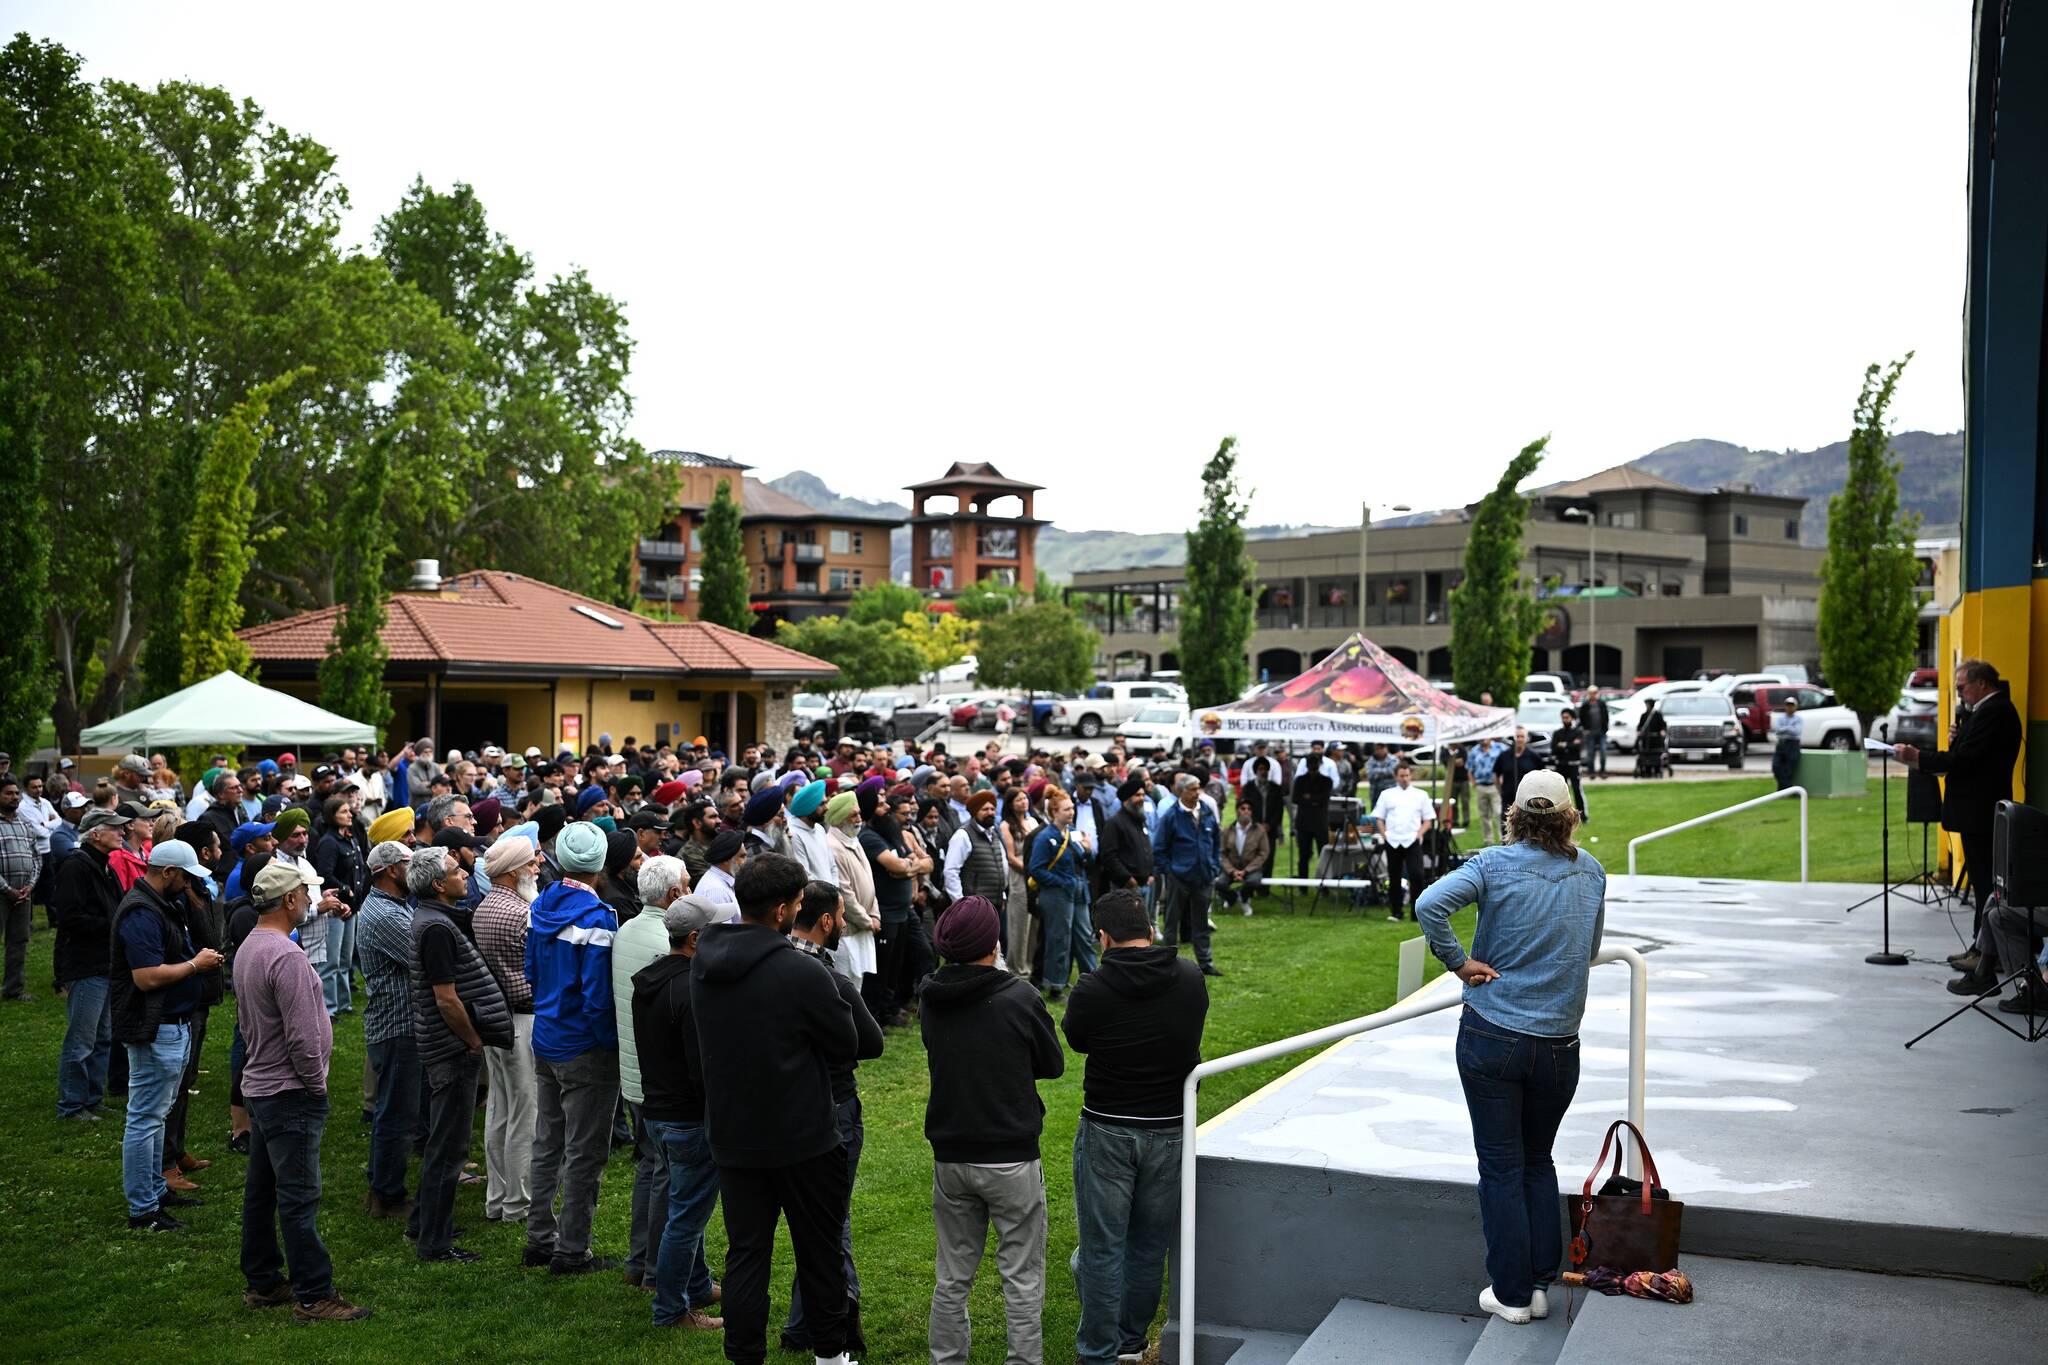 Hundreds braved the rain to show up for the Stronger Together Rally in Osoyoos on May 28, calling for support for the agricultural industry. (Brennan Phillips/Western News)